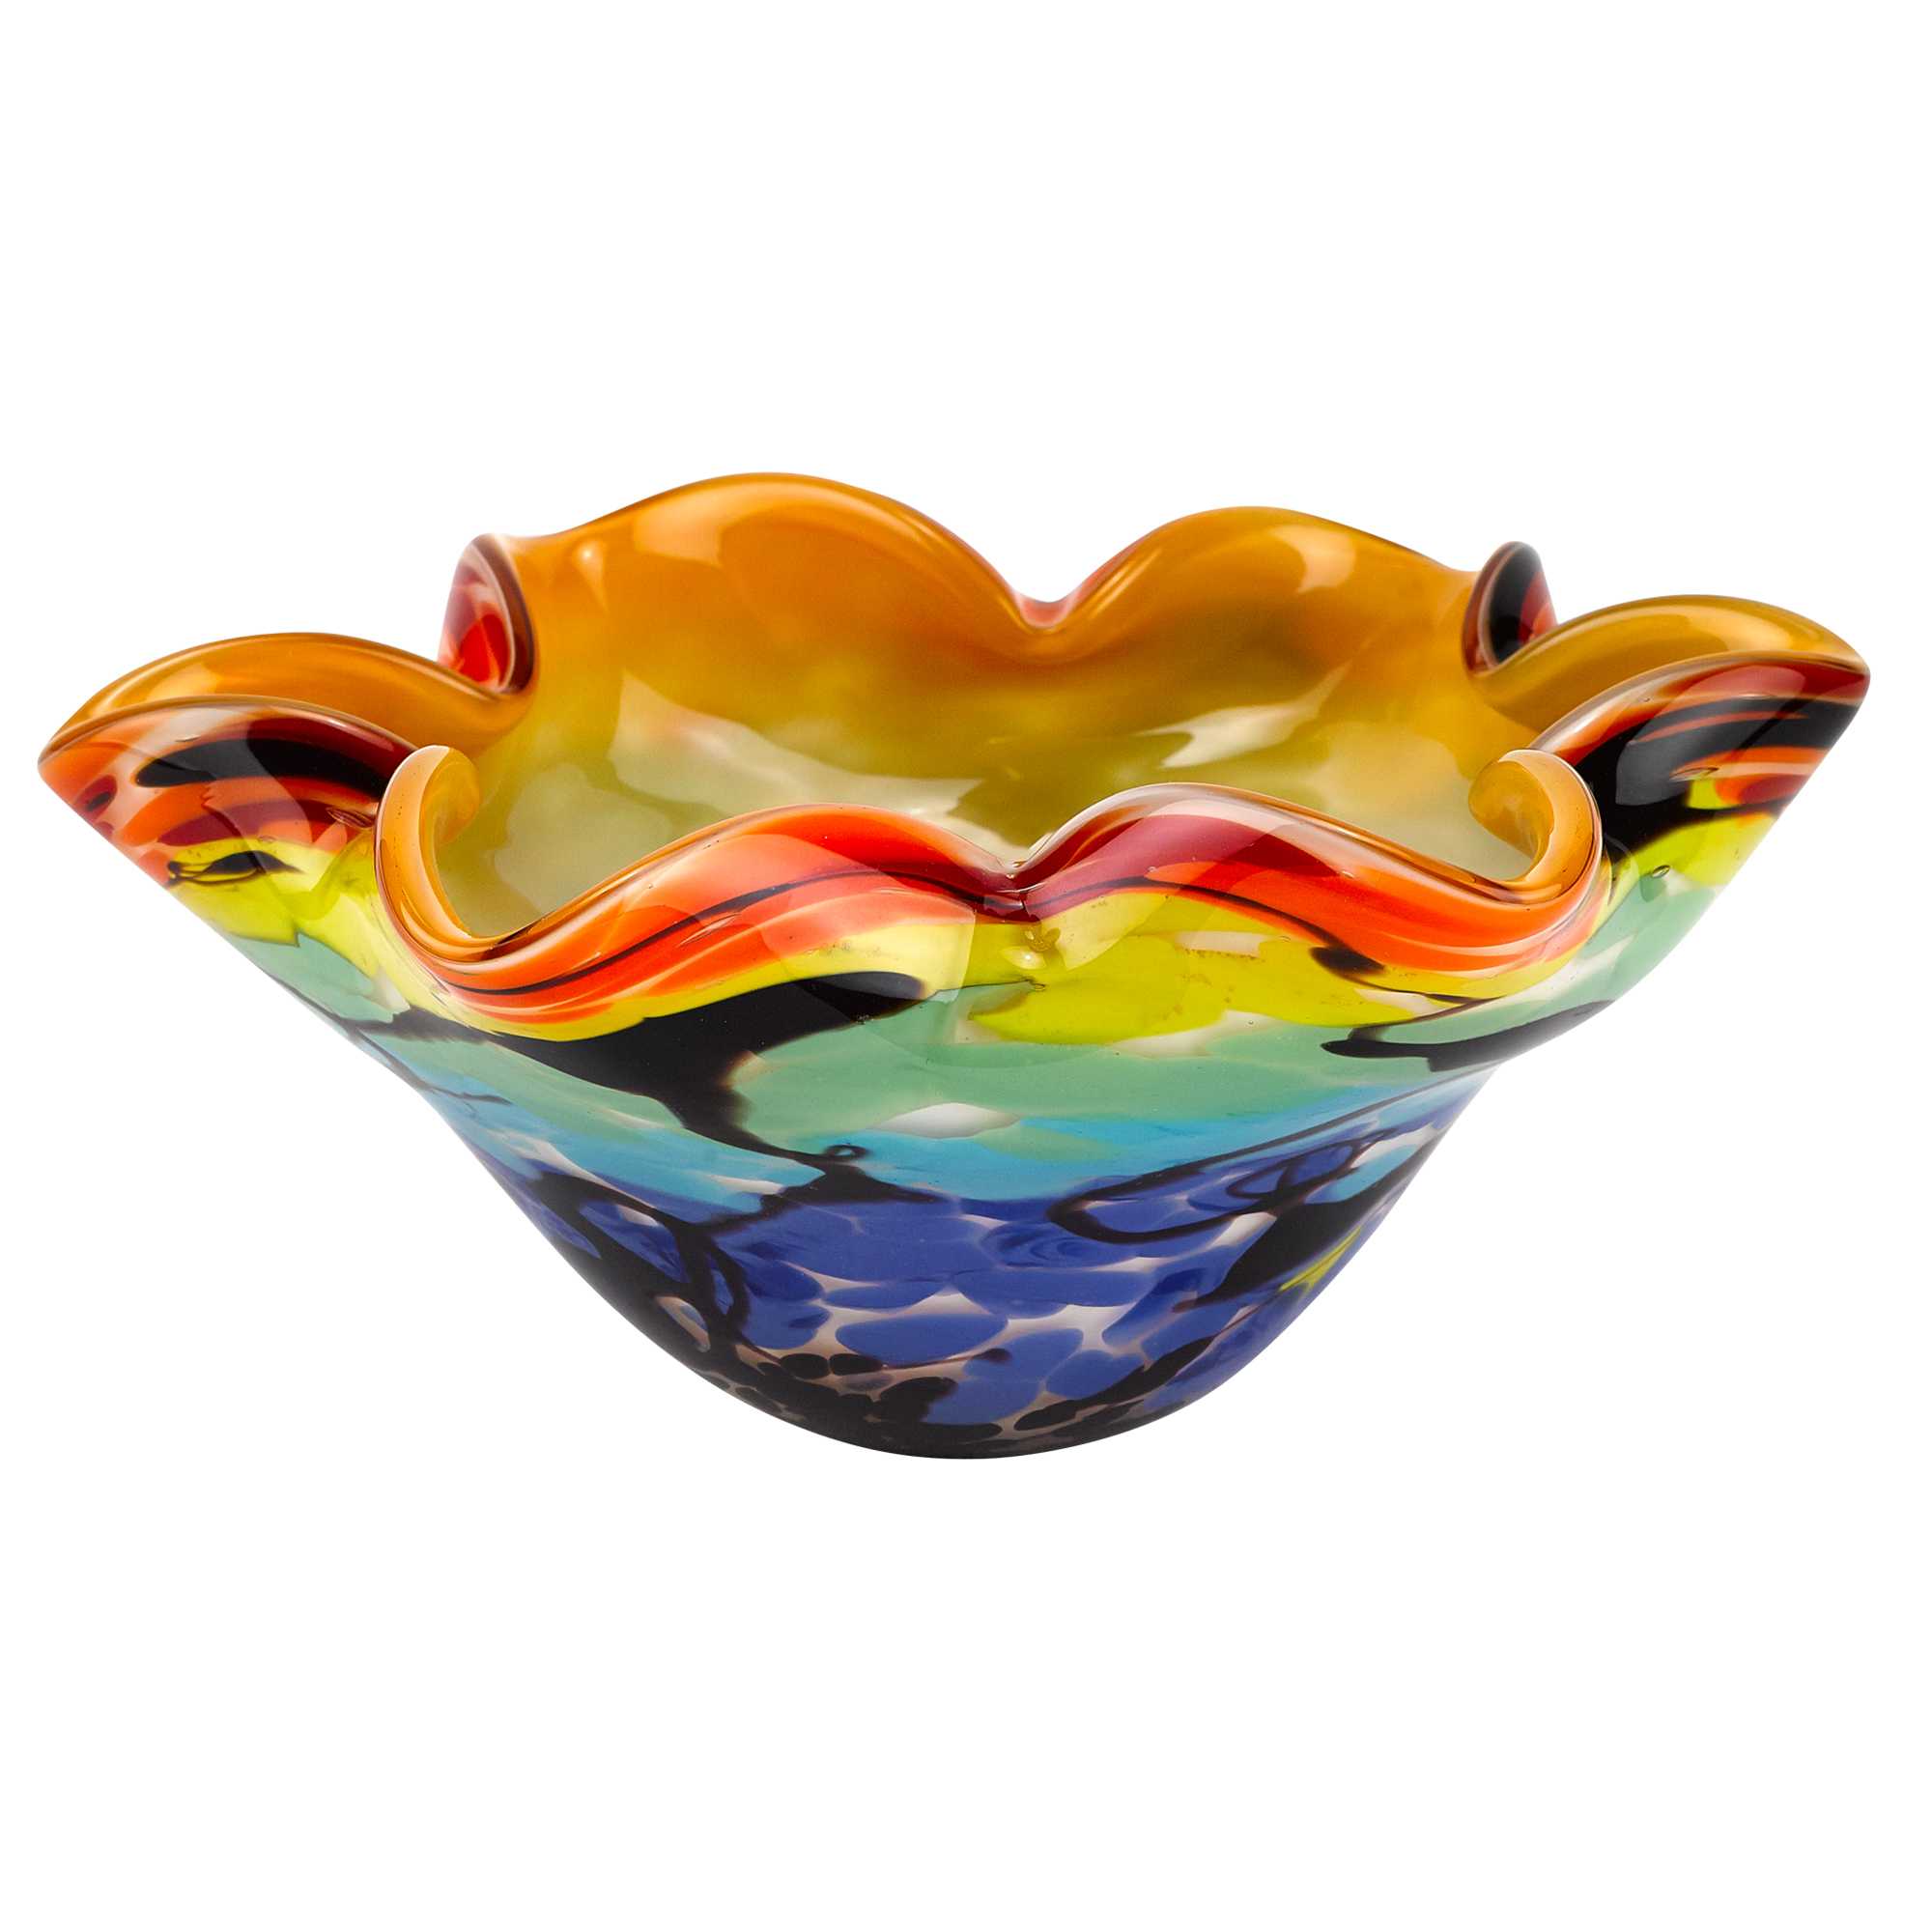 8.5" Mouth Blown Art Glass Wavy Inch Centerpiece or Candy Bowl